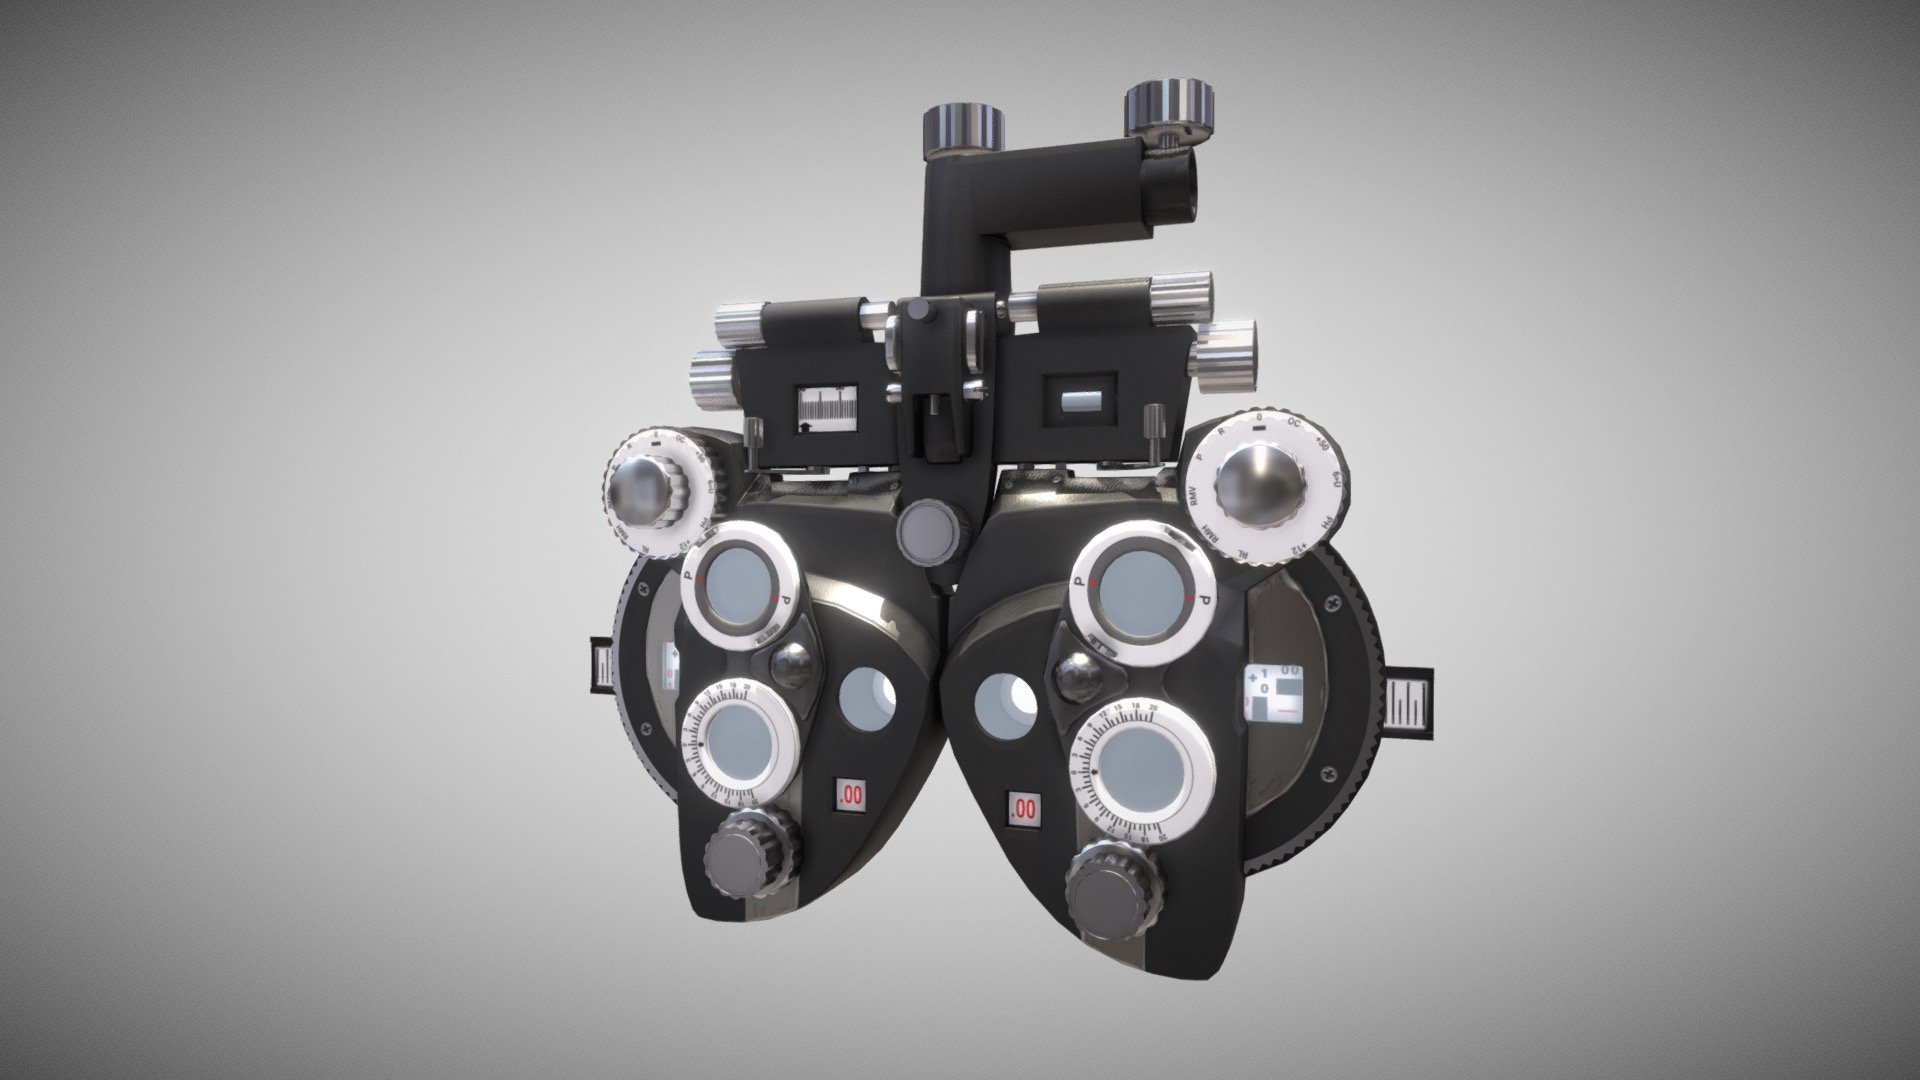 Optical Phoropter 3d model - Optical Phoropter - 3D model by reezzy (@whoisreezzy) 3d model